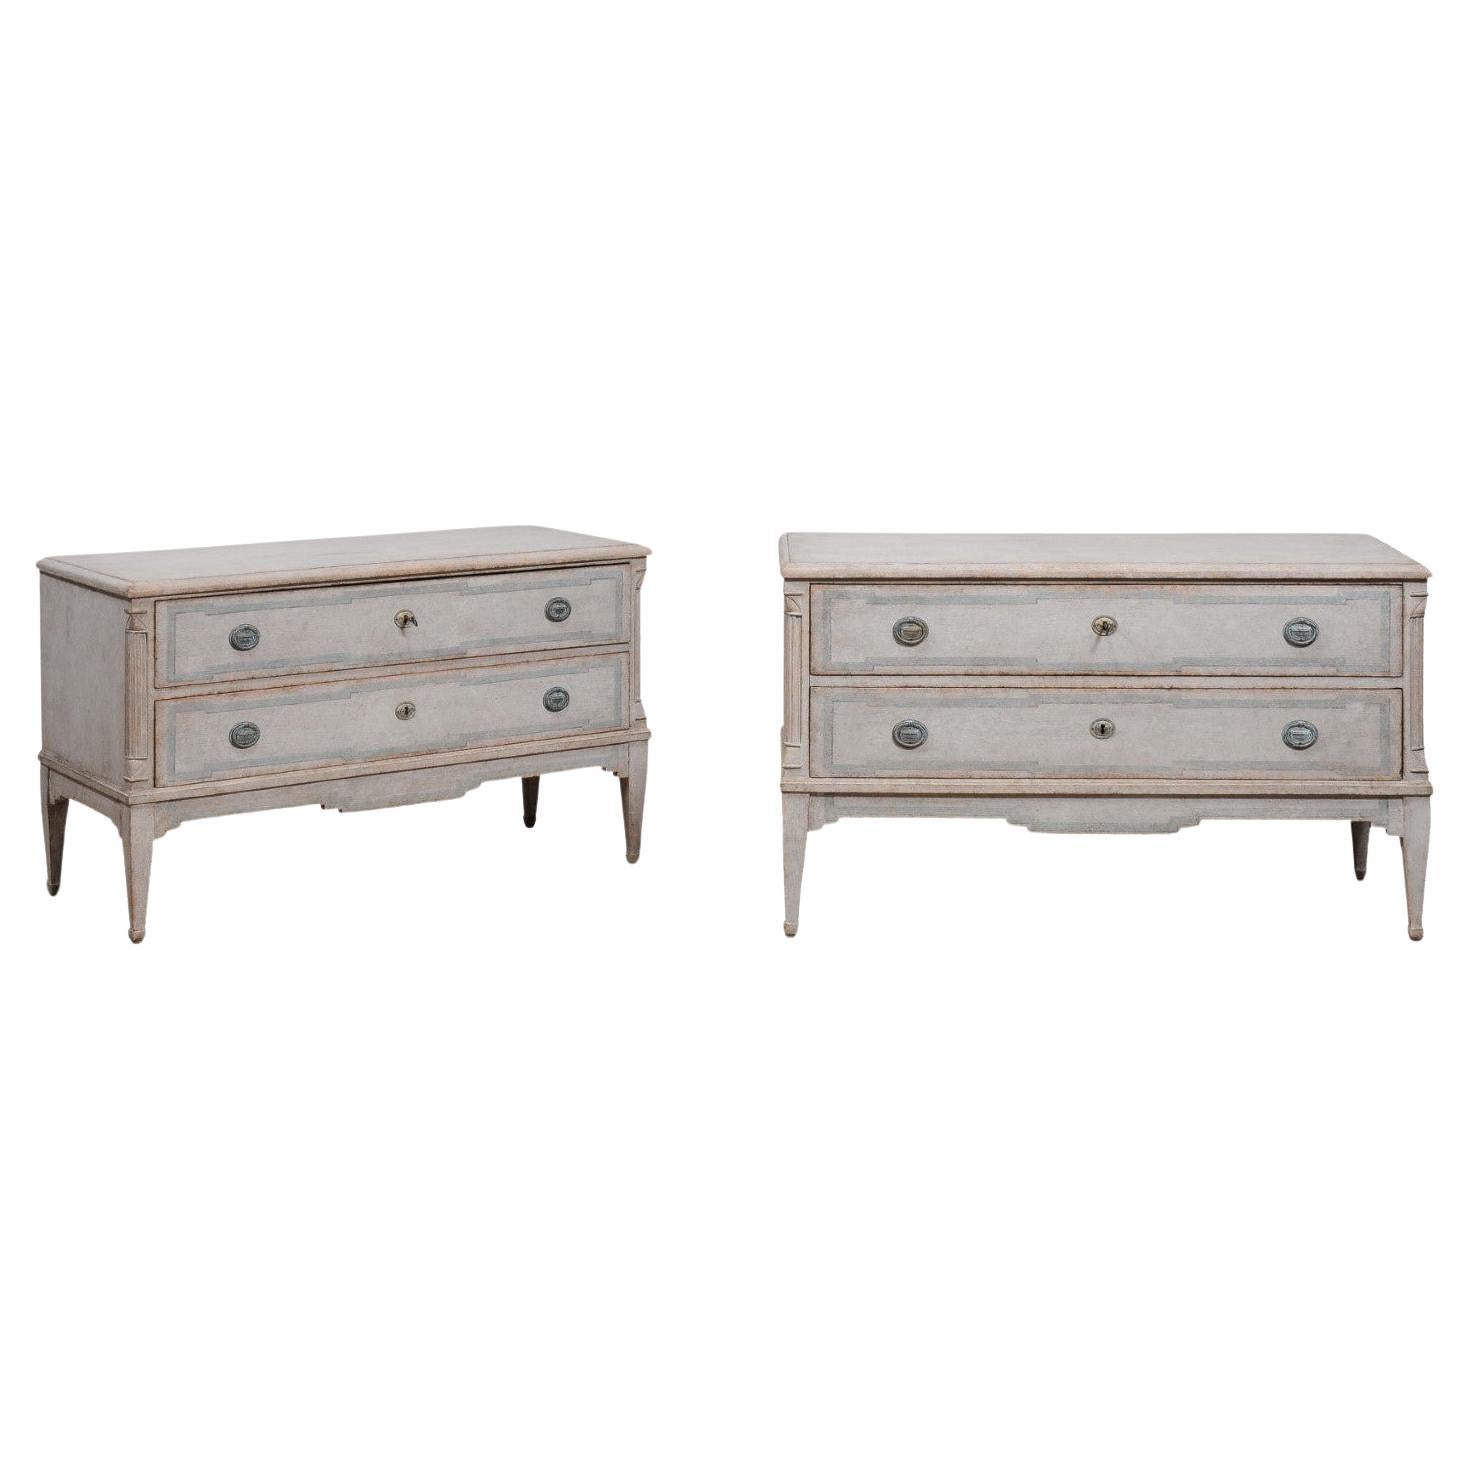 Danish 1820s Light Gray Painted Two-Drawer Chests with Semi-Columns, a Pair